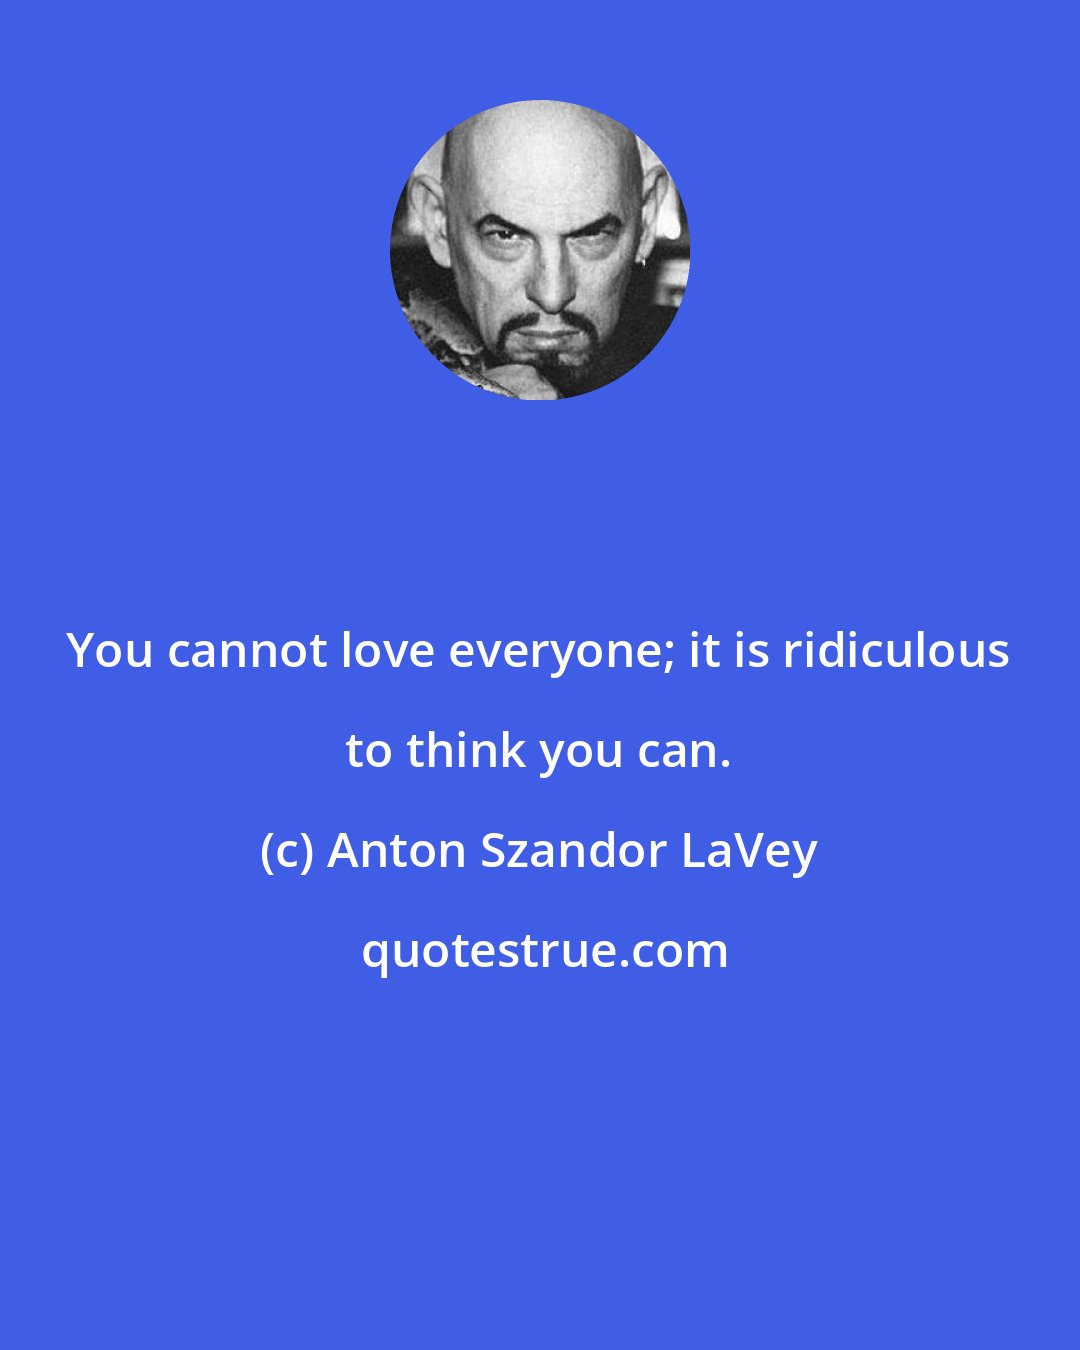 Anton Szandor LaVey: You cannot love everyone; it is ridiculous to think you can.